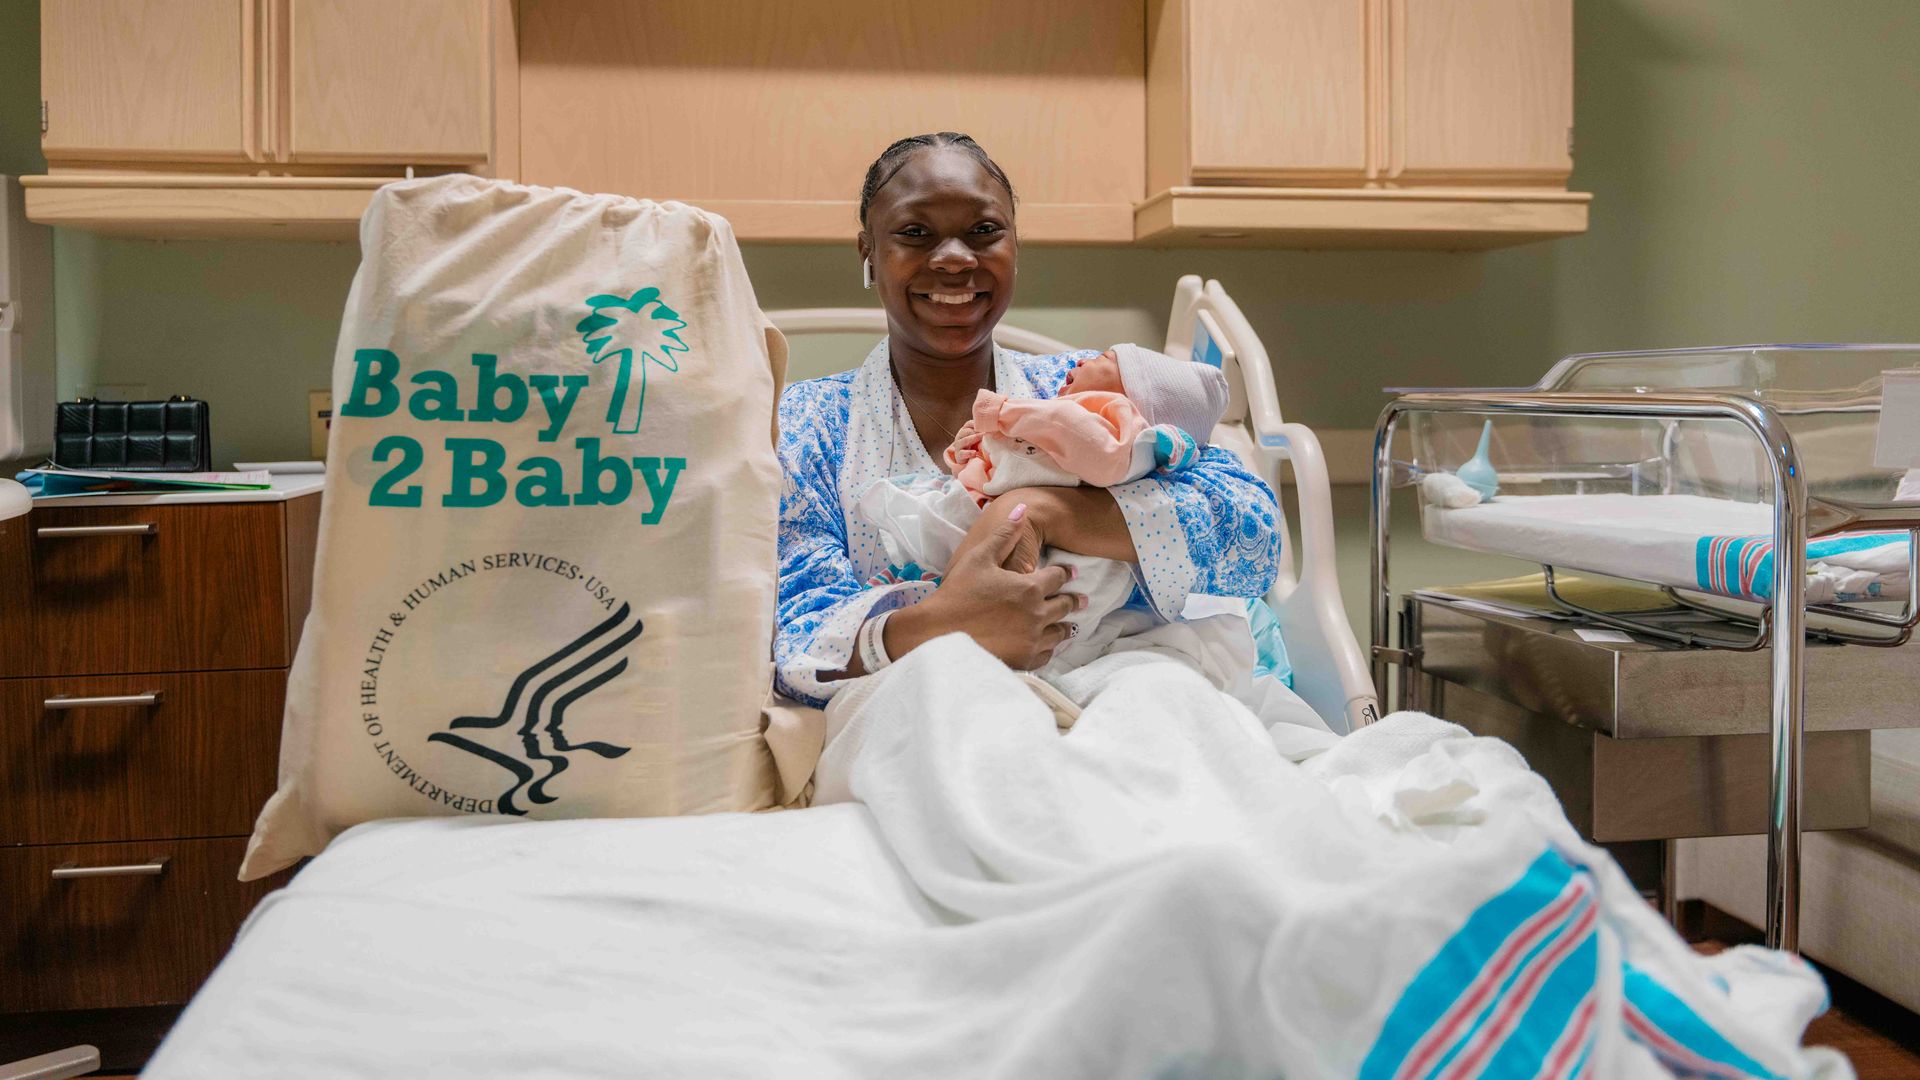 Photo shows a new mom in a hospital bed with her child and a Baby 2 Baby care kit